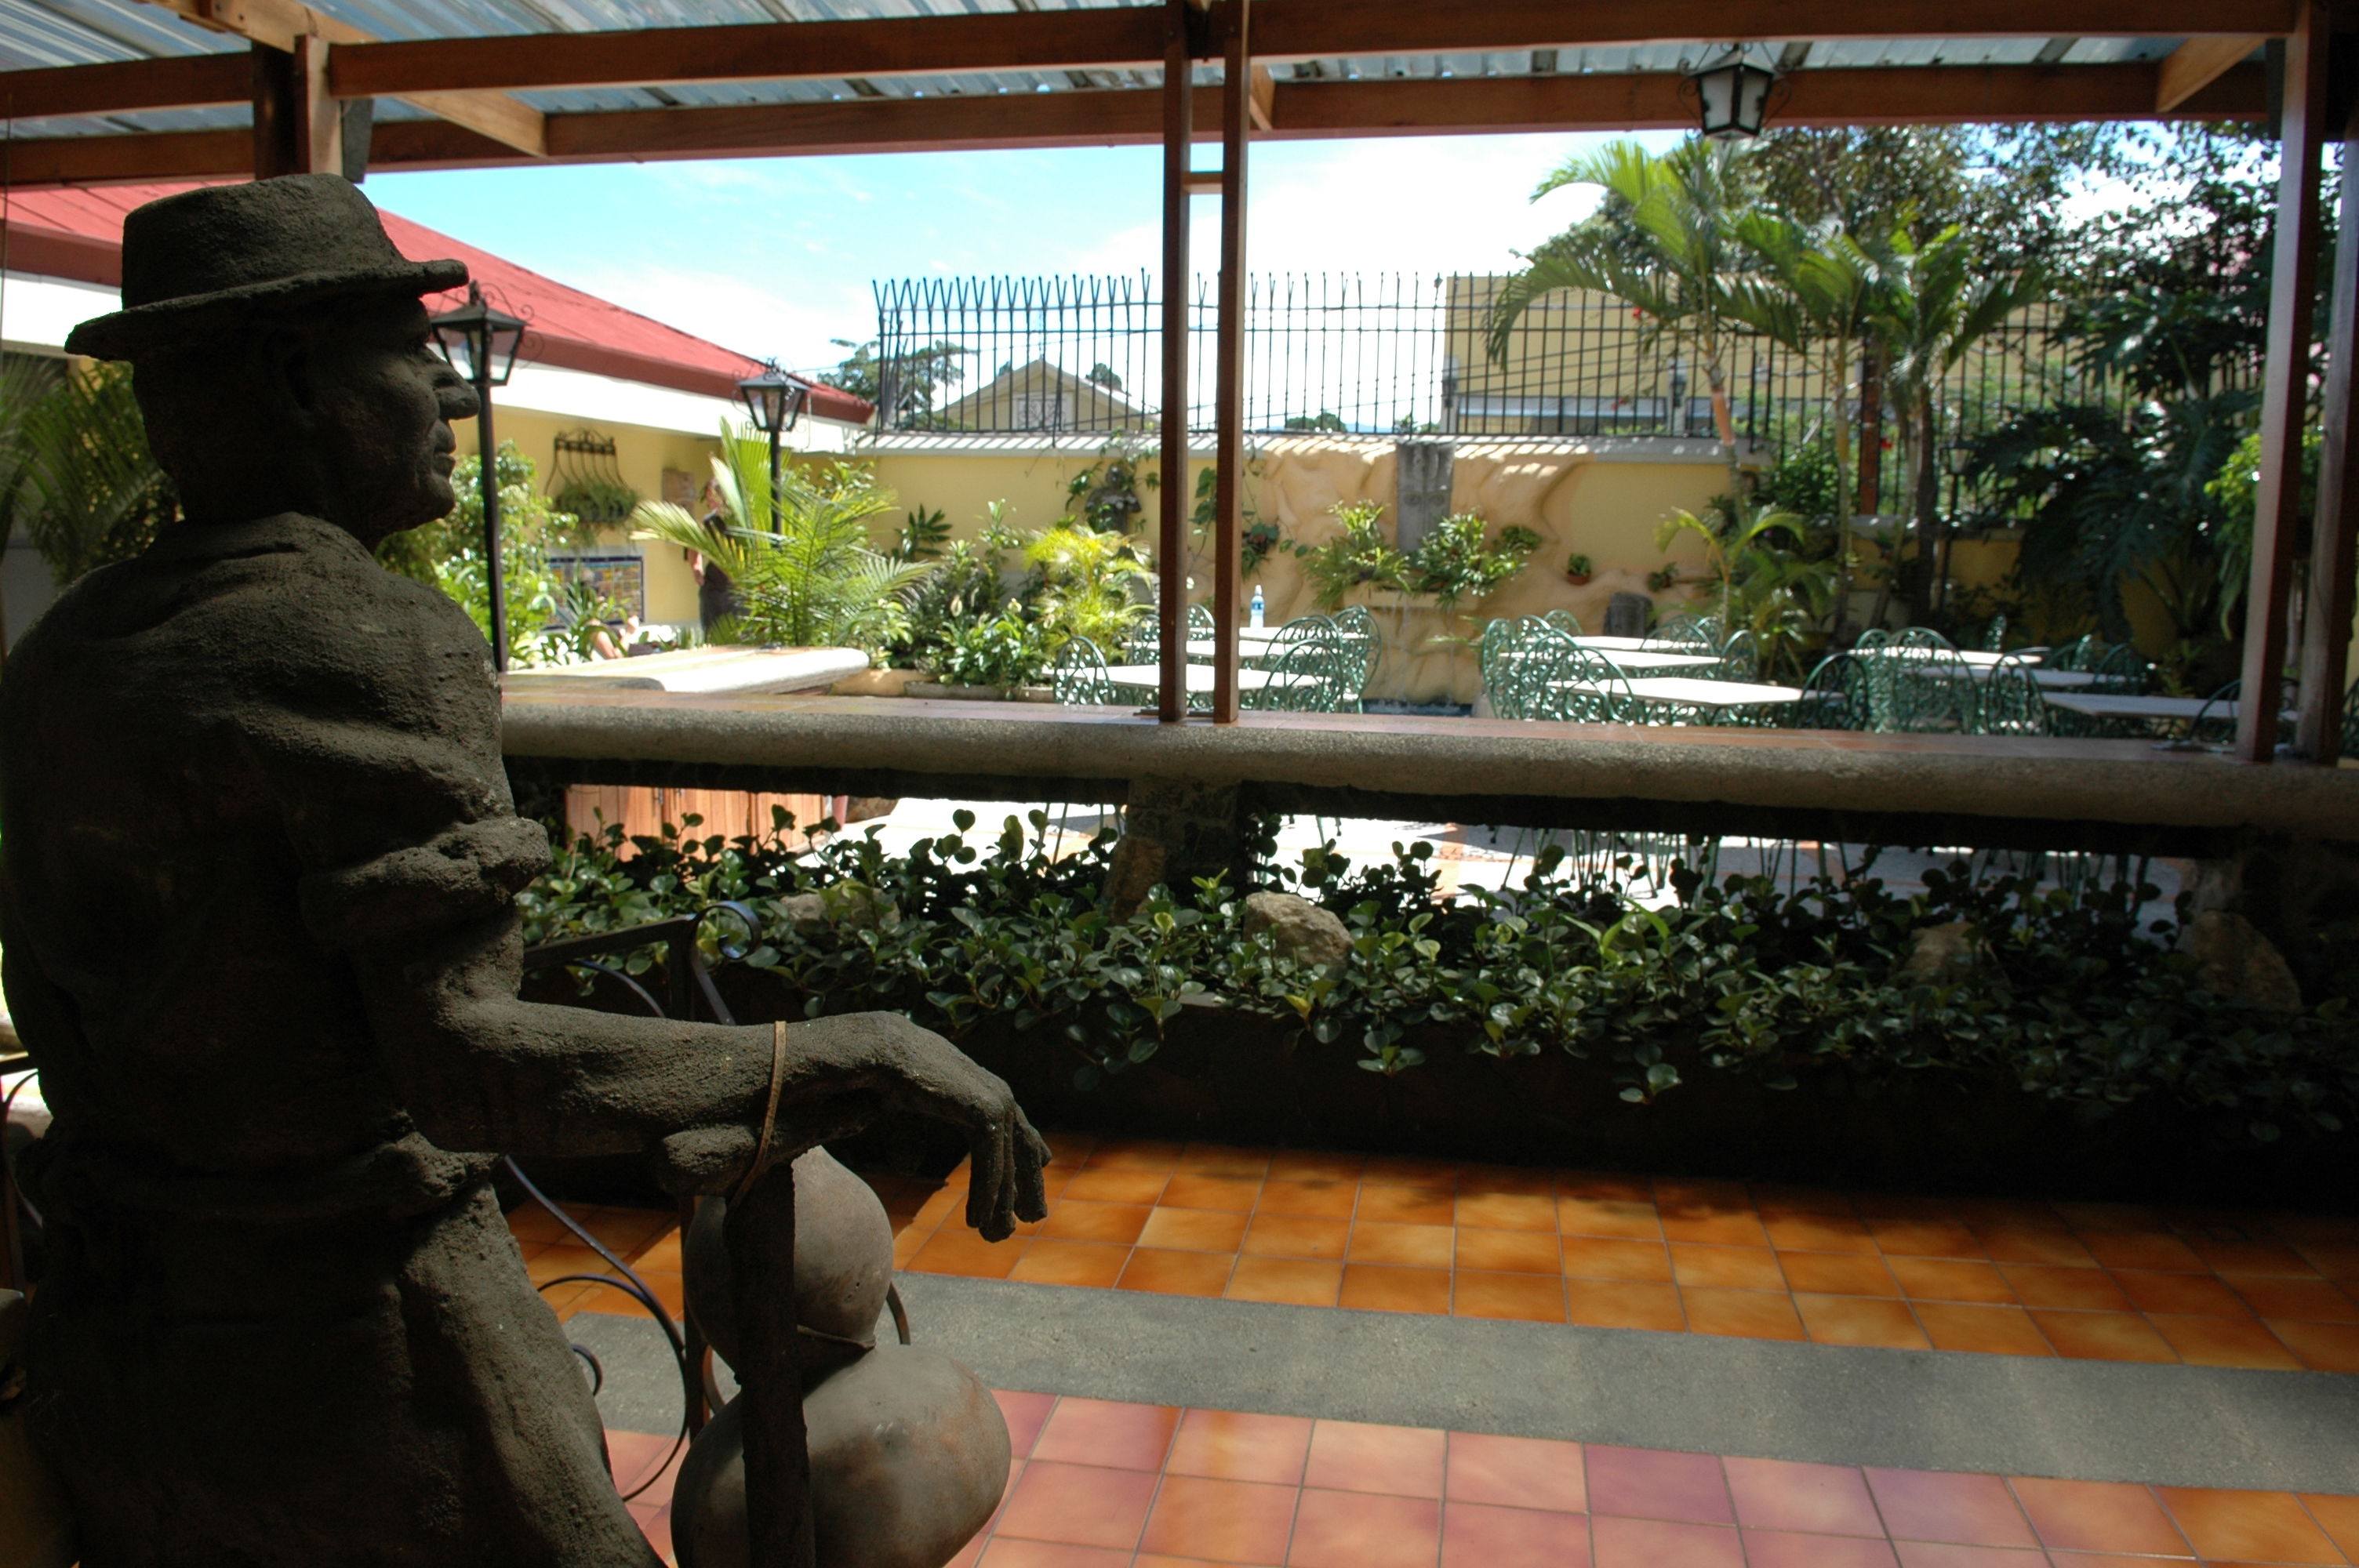 Our hotel in San José had a nice outdoor terrace in which to enjoy our breakfast